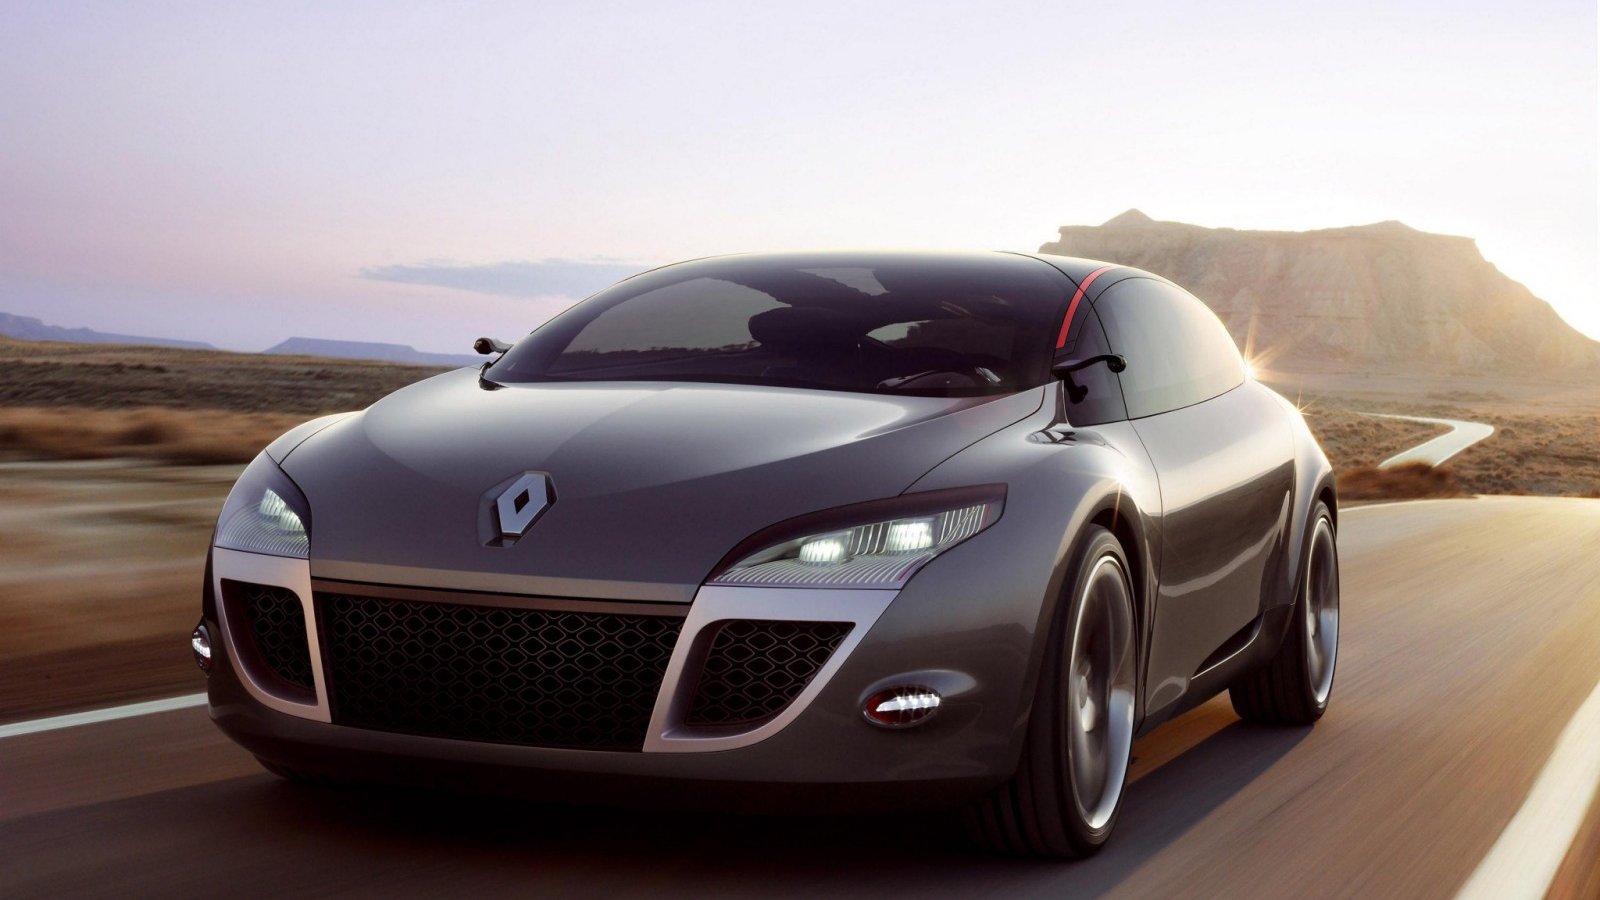 Best Renault wallpaper ID:373532 for High Resolution hd 1600x900 computer